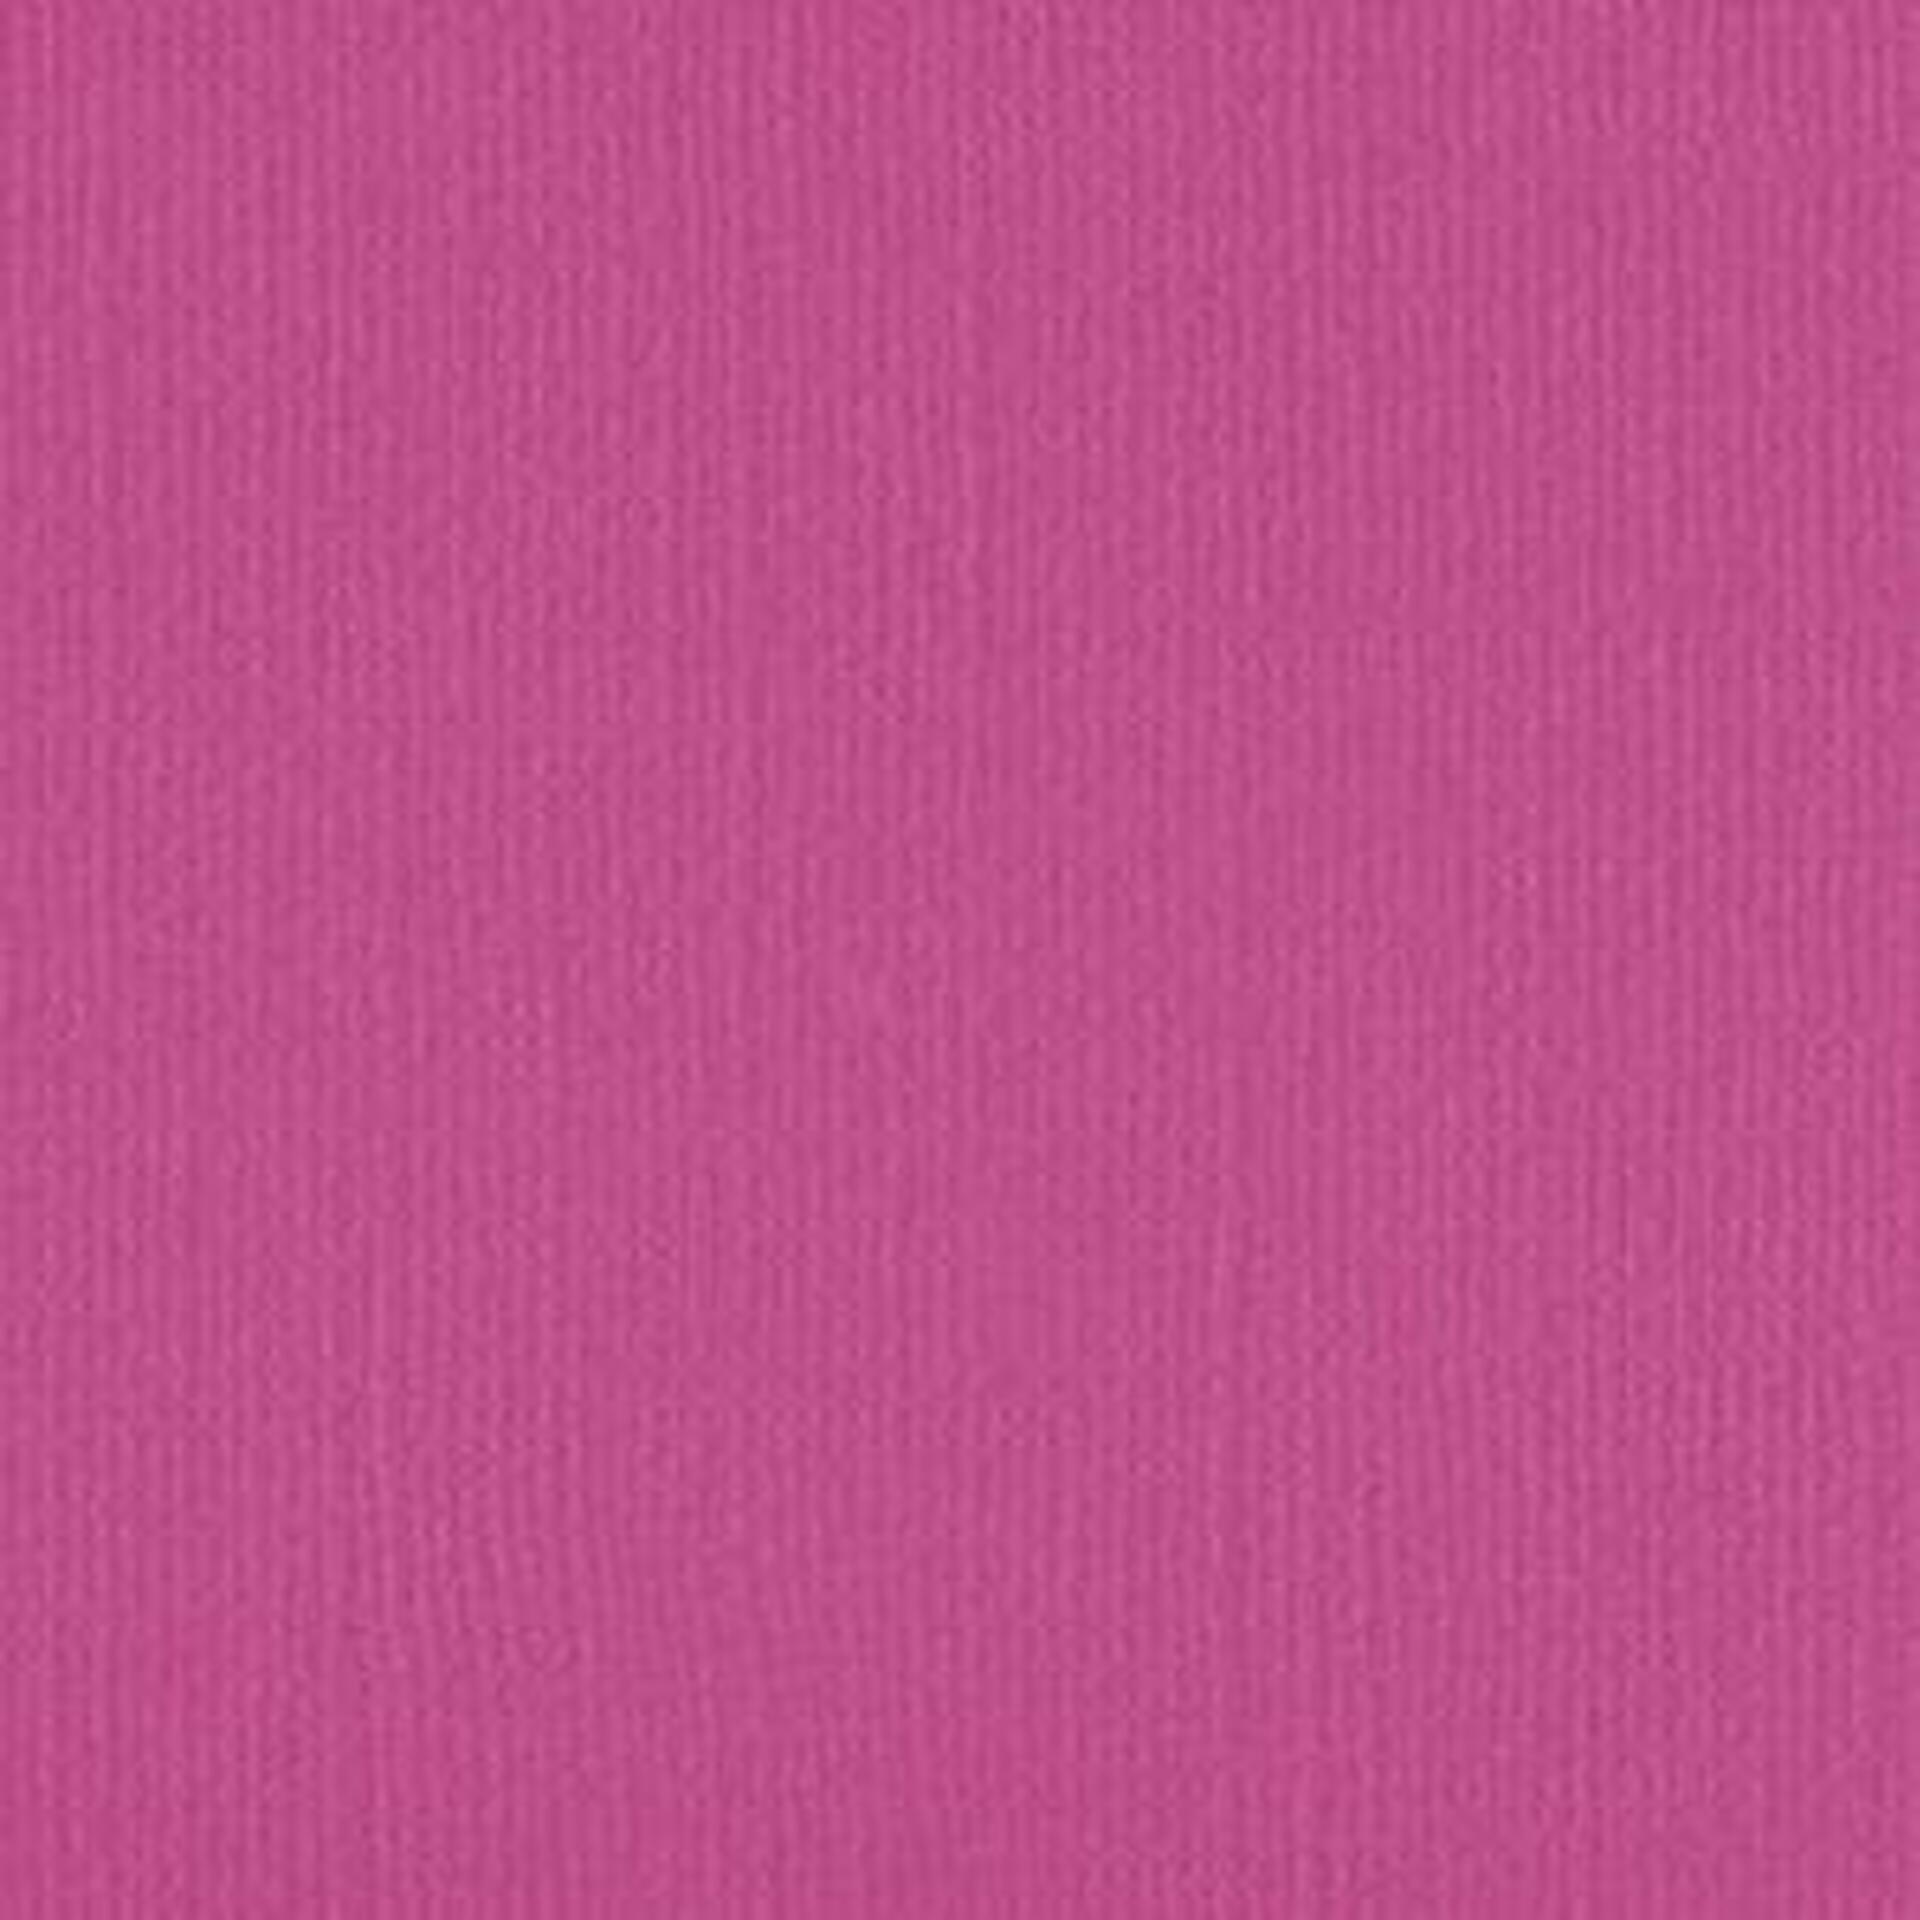 Down Under Cardstock - Fuchsia pk of 4 sheets